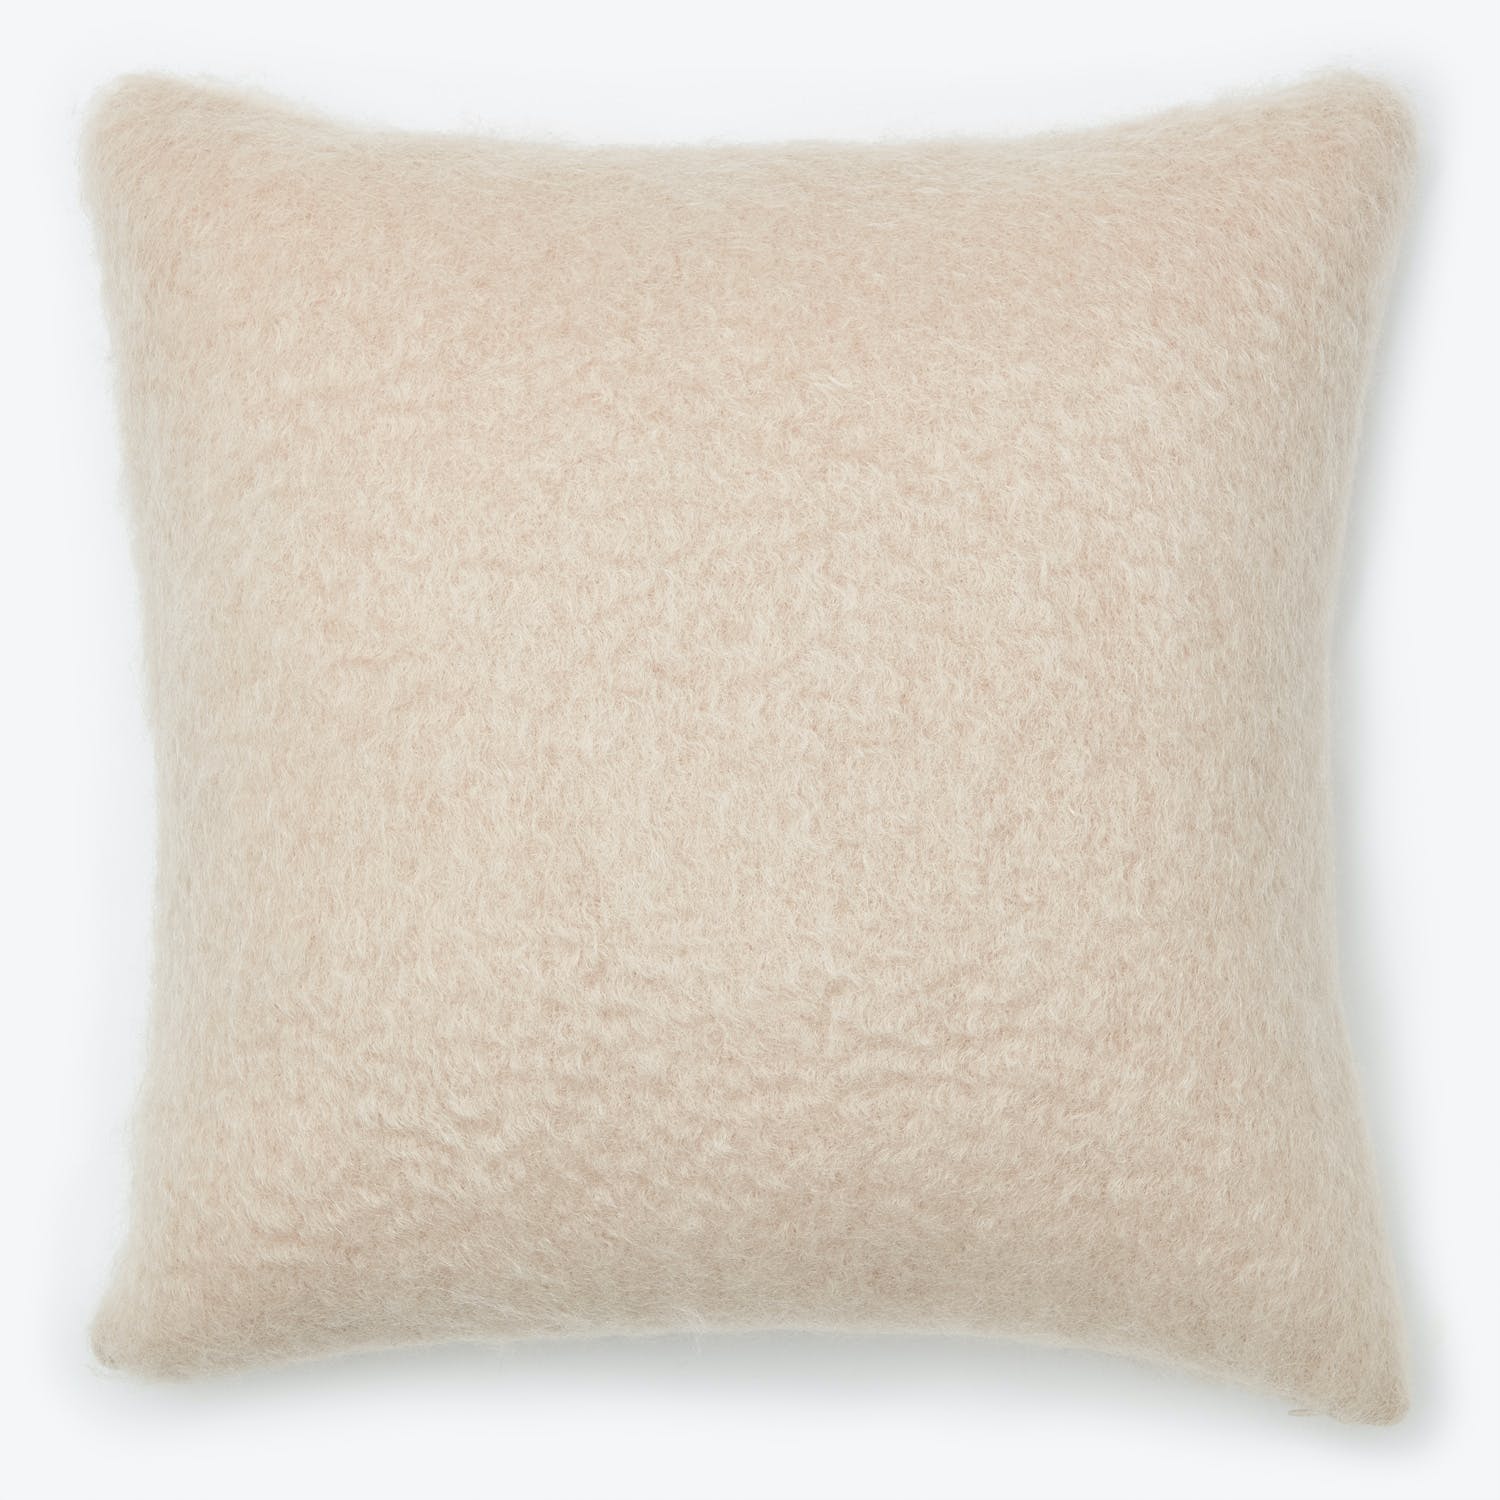 Mohair Square Pillow-Sand-18x18